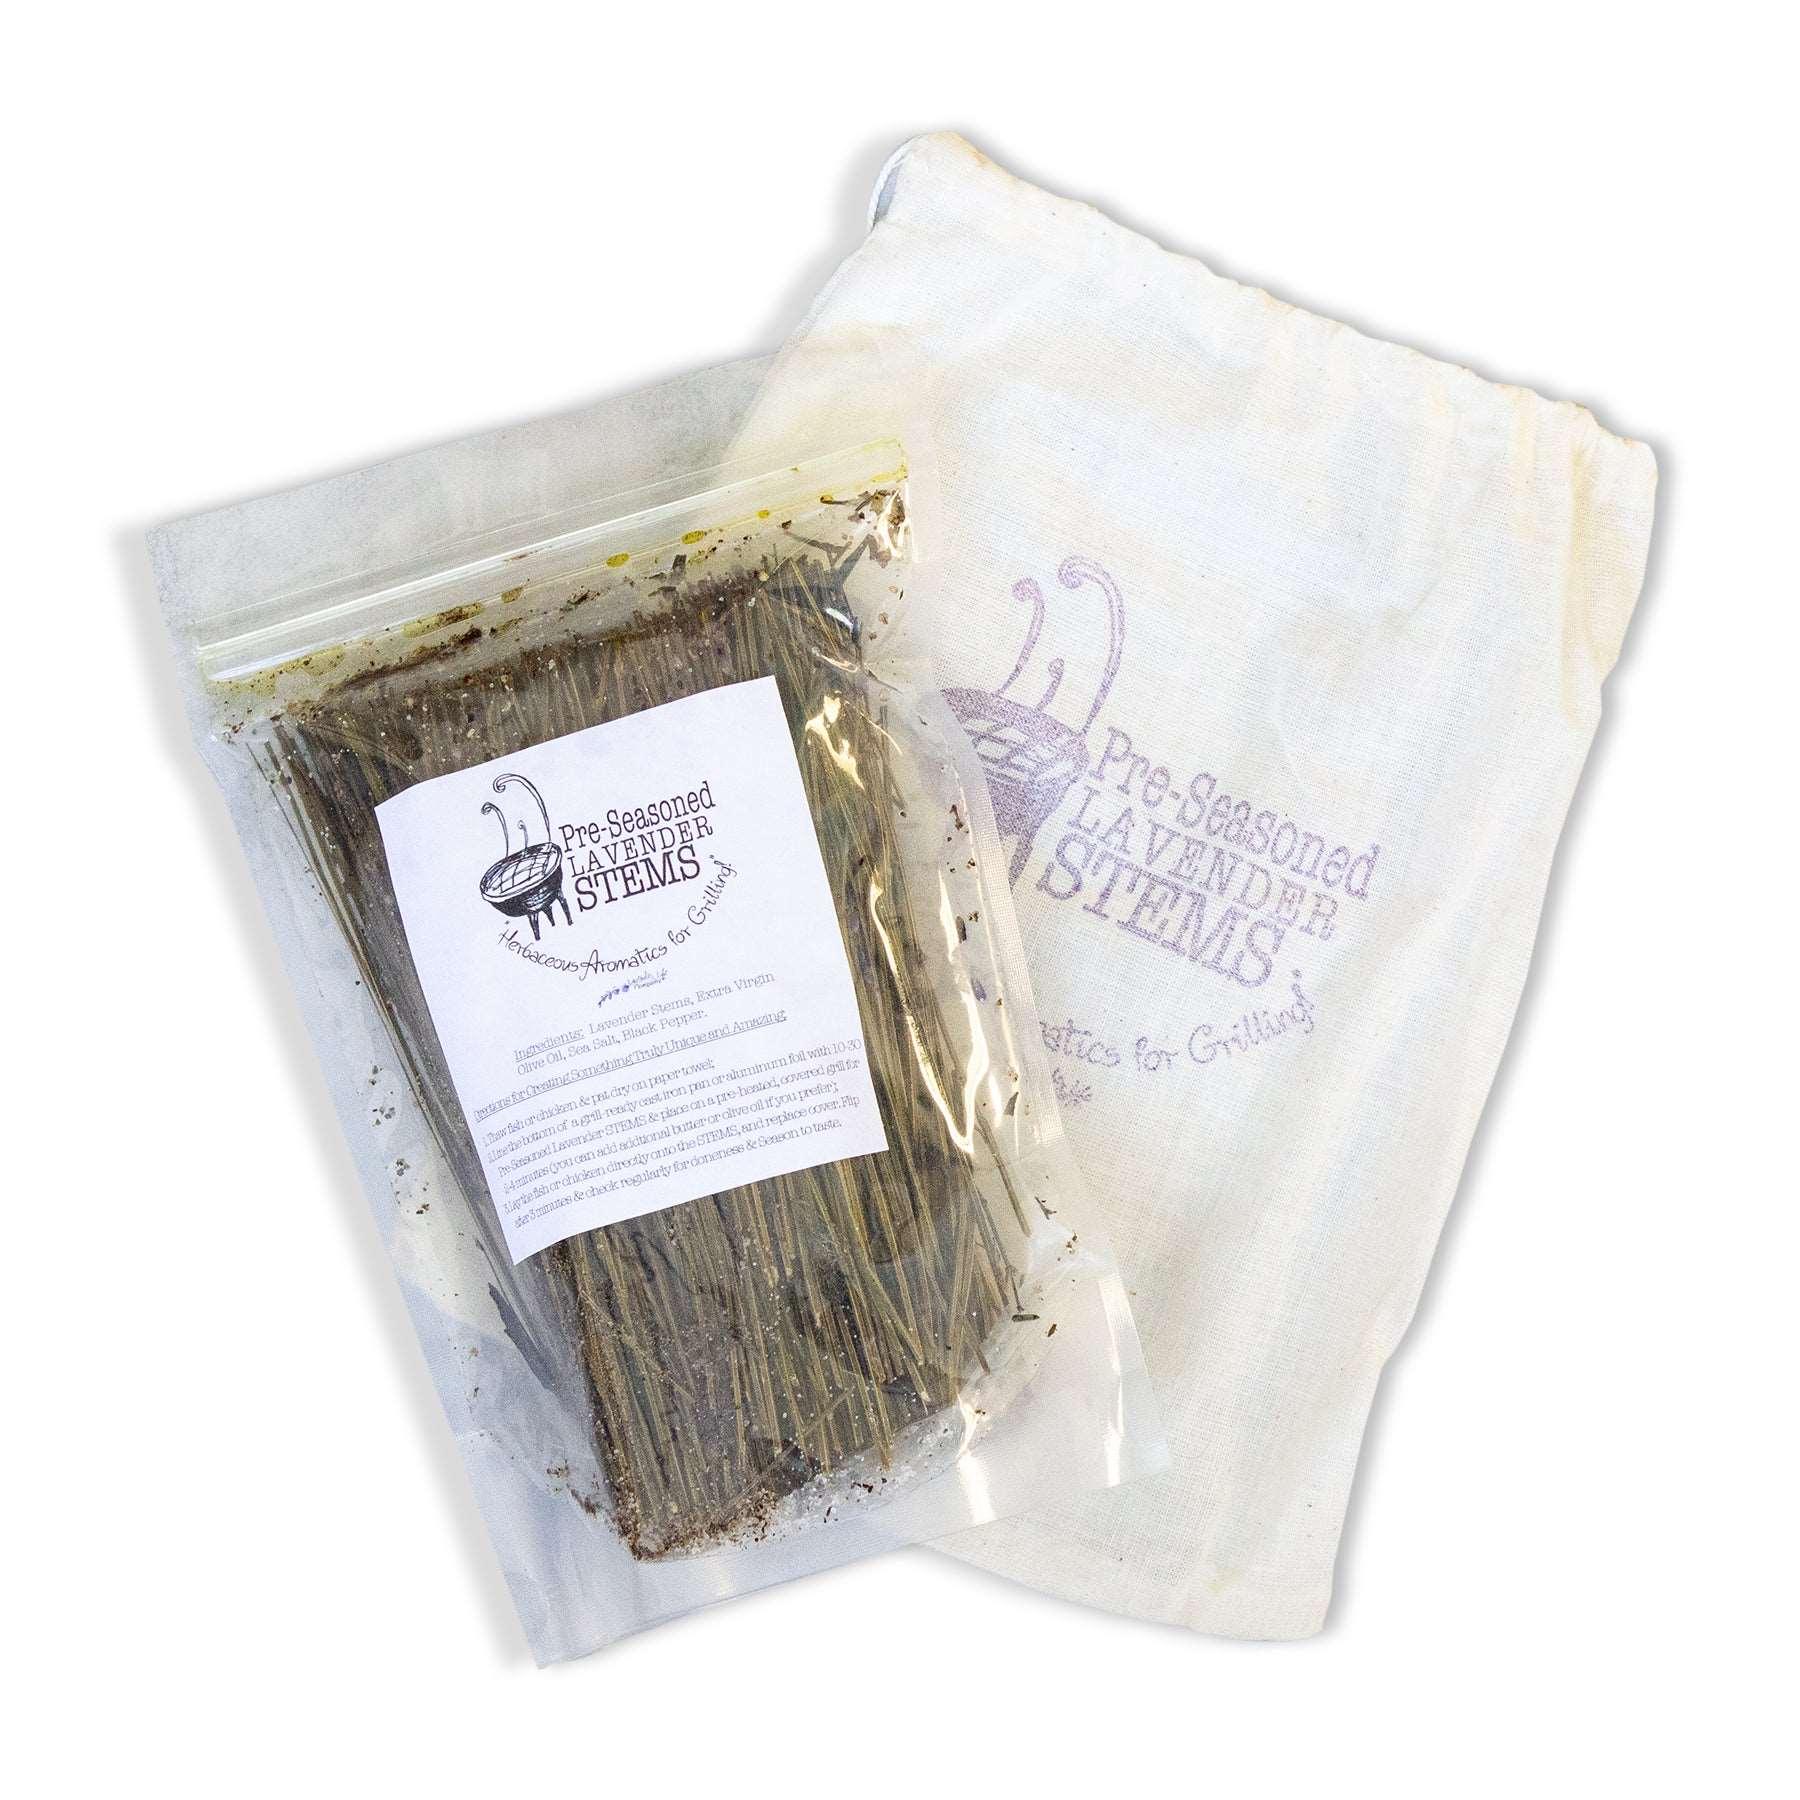 Pre-Seasoned Lavender Stems -Herbaceous Aromatics for Grilling - Lavender Life Company